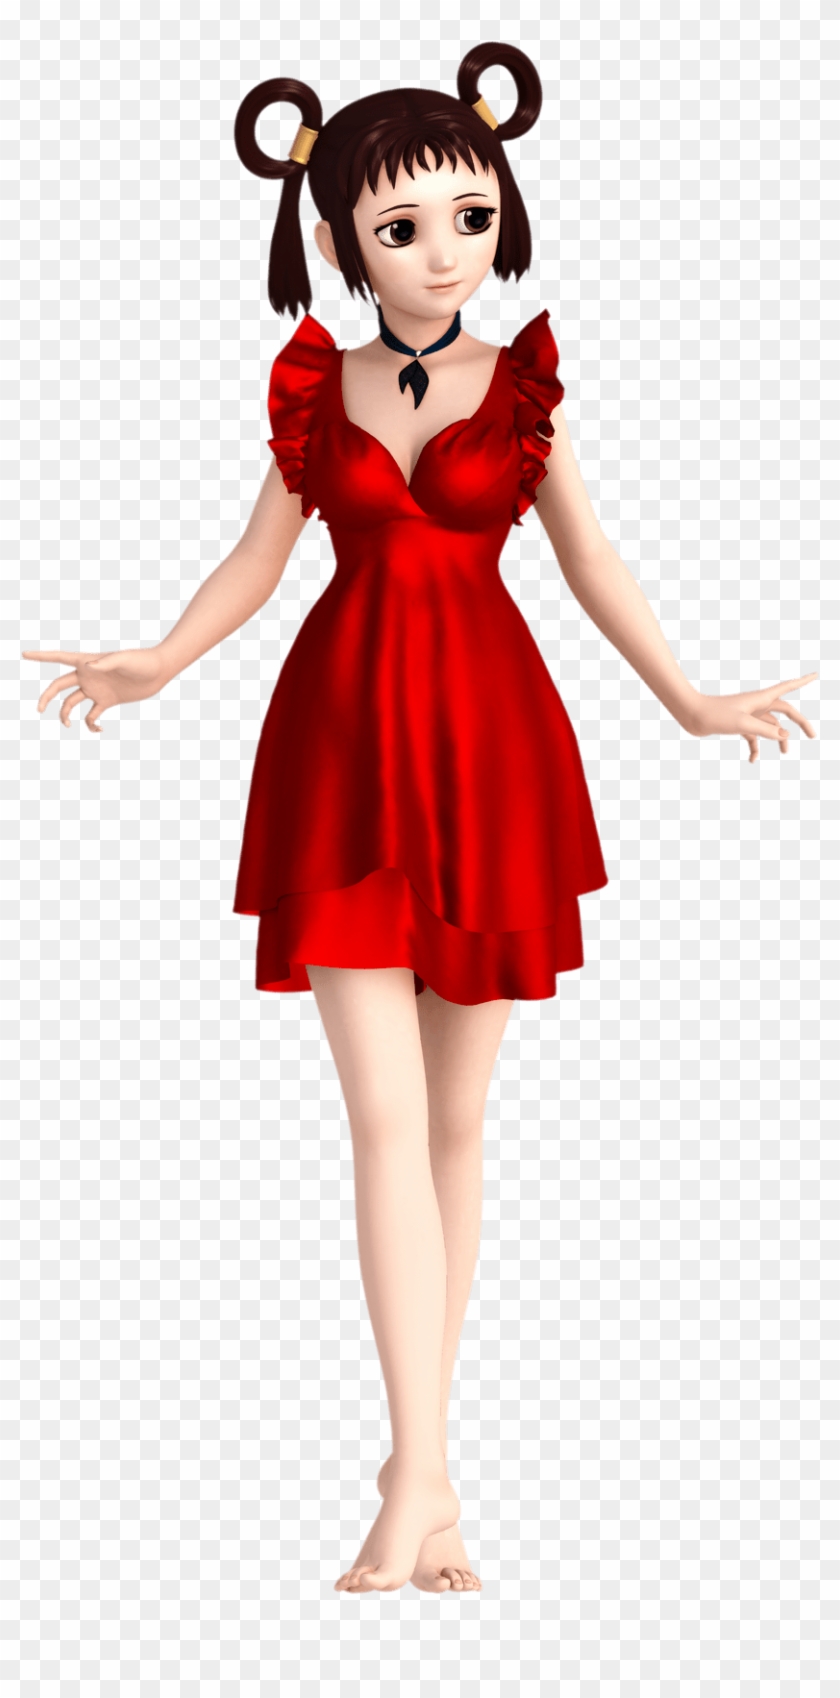 A Cute Anime Character In A Red Dress - Doll Clipart #6037455